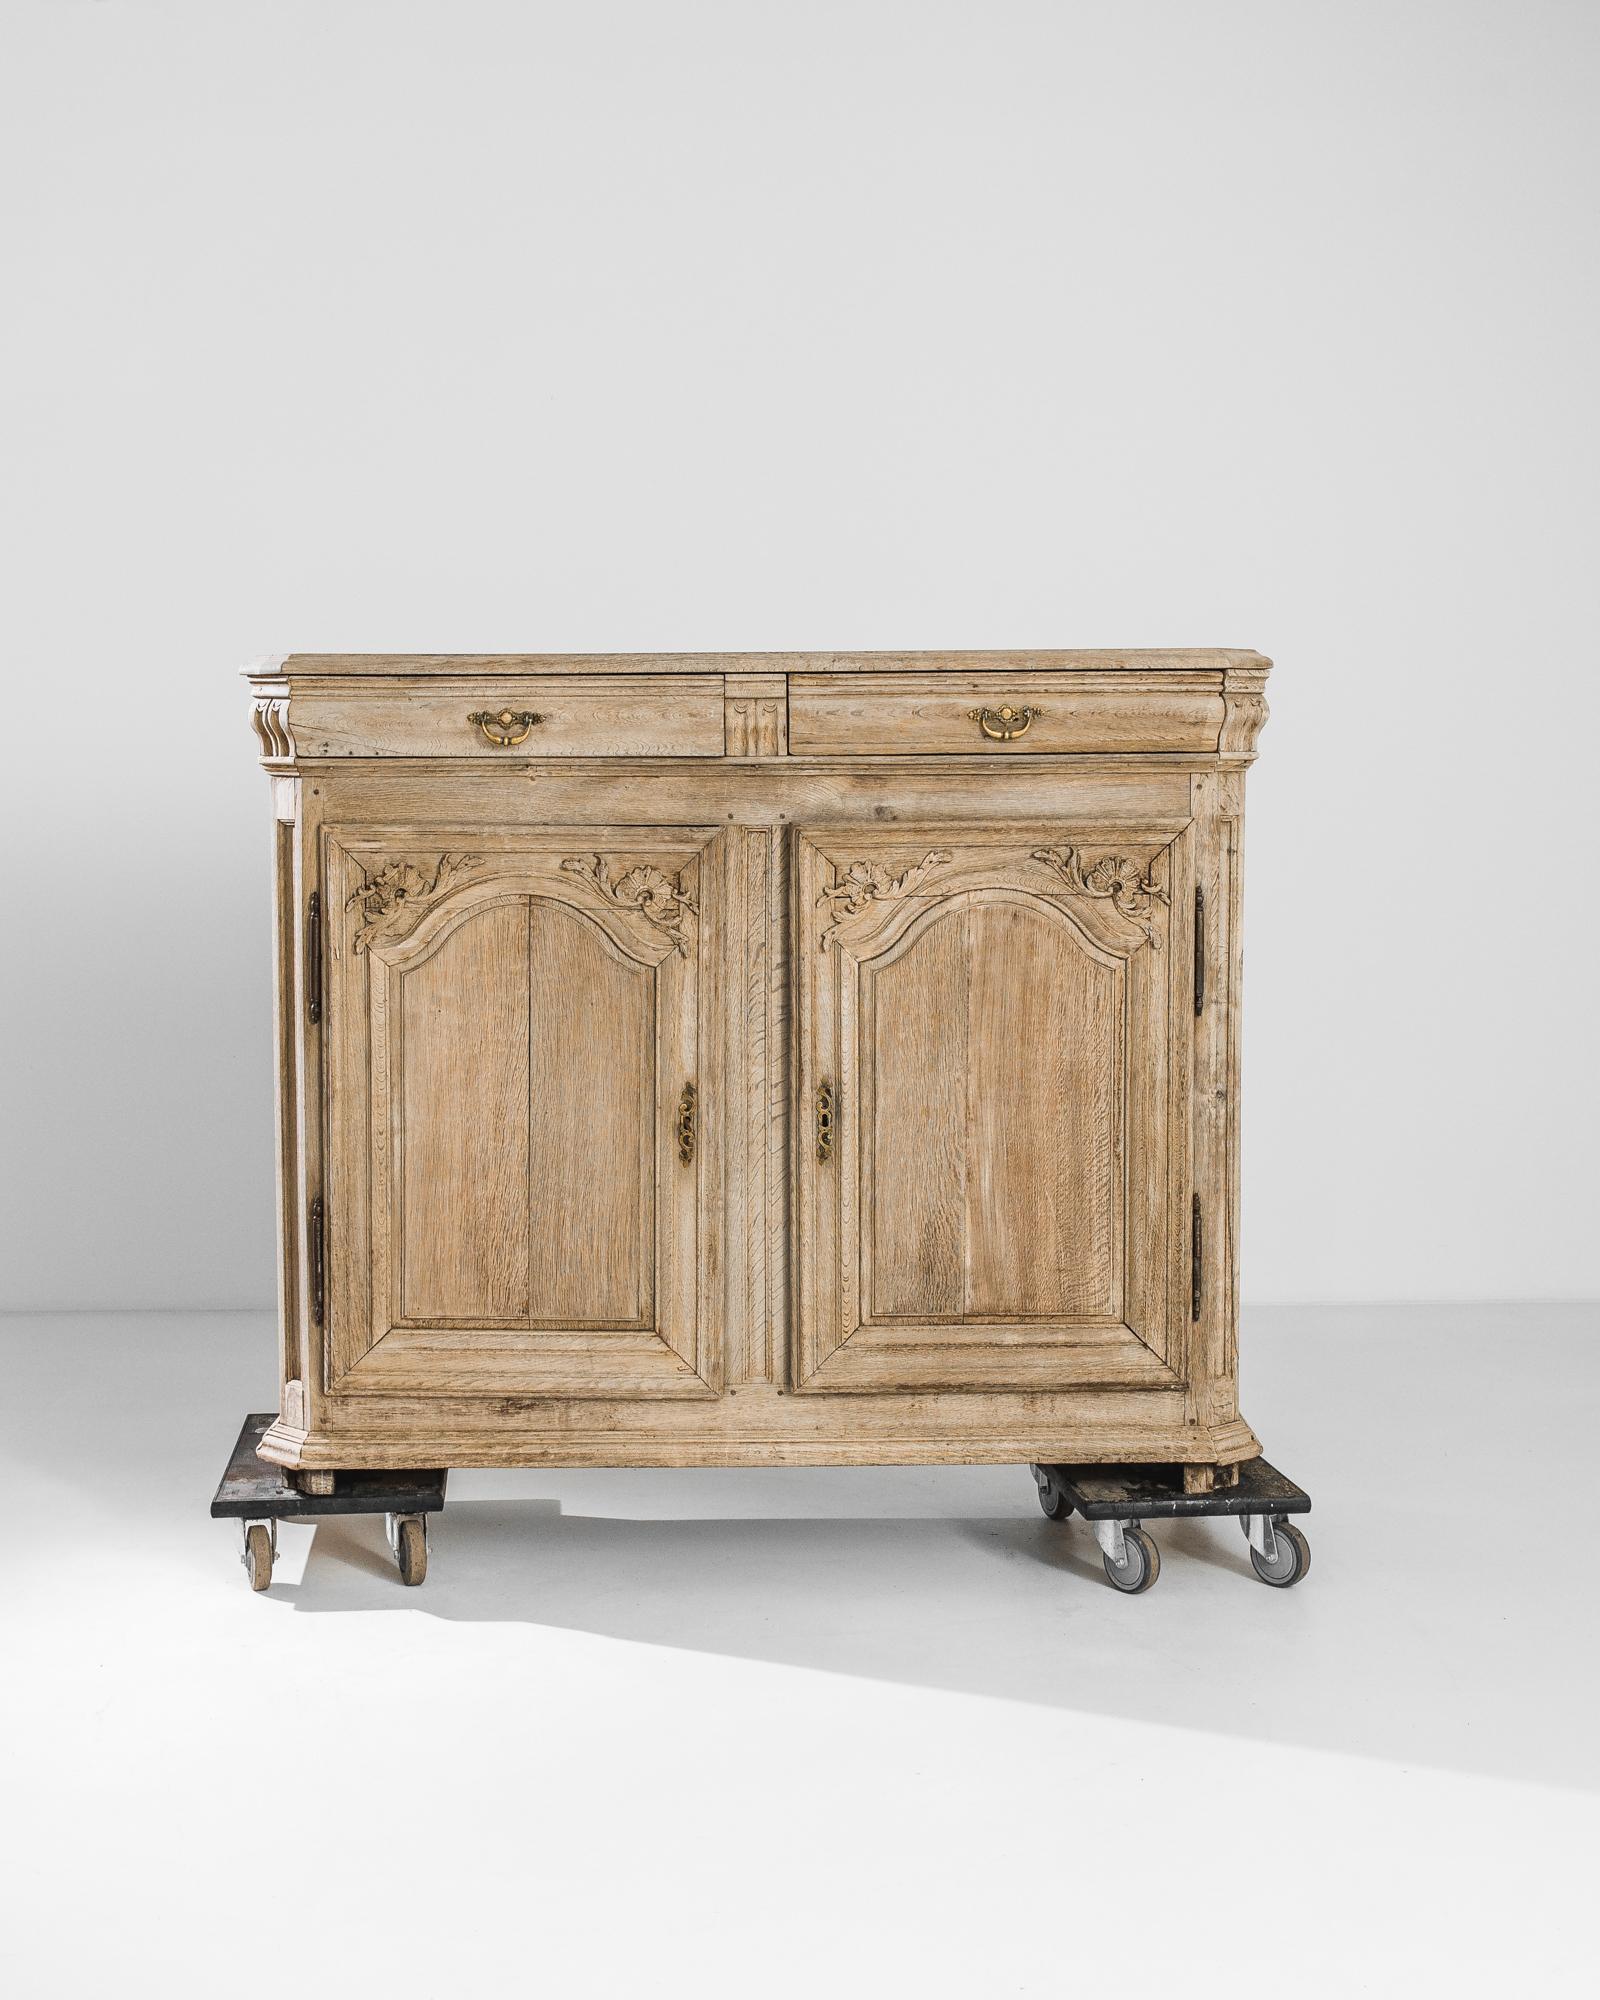 A bleached oak buffet from France, produced circa 1800. A handsome antique buffet, featuring two sliding drawers with brass escutcheons and hanging pulls and a lower, locking double cabinet. In line with the revolutionary spirit of the age bringing